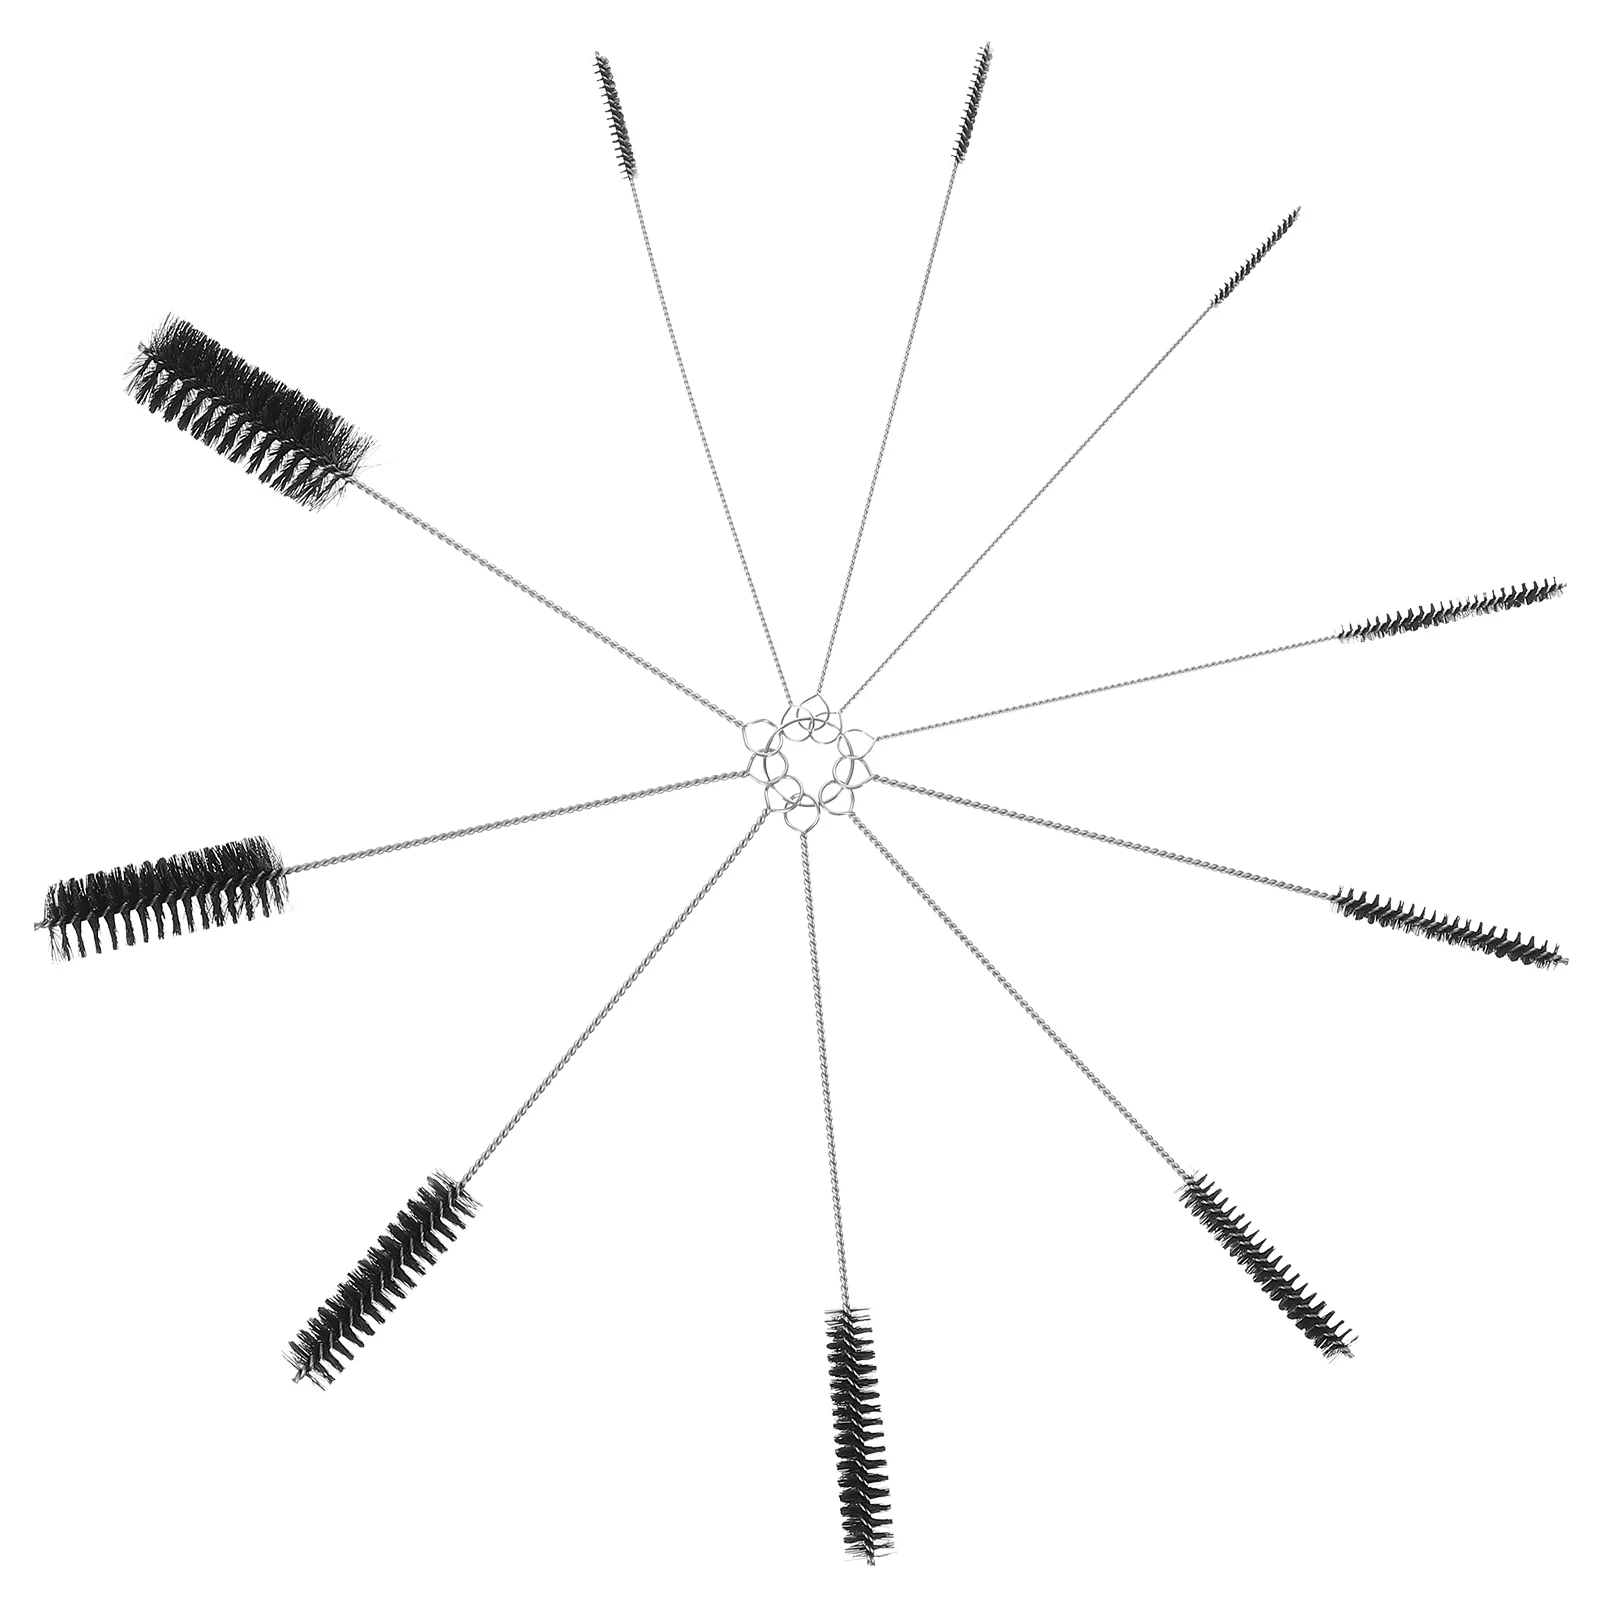 

Pipe Cleaning Brush Set- 10 Different Diameters Nylon Tube Brushes for Drinking Straws Glasses Keyboards Jewelry Cleaning Pipes